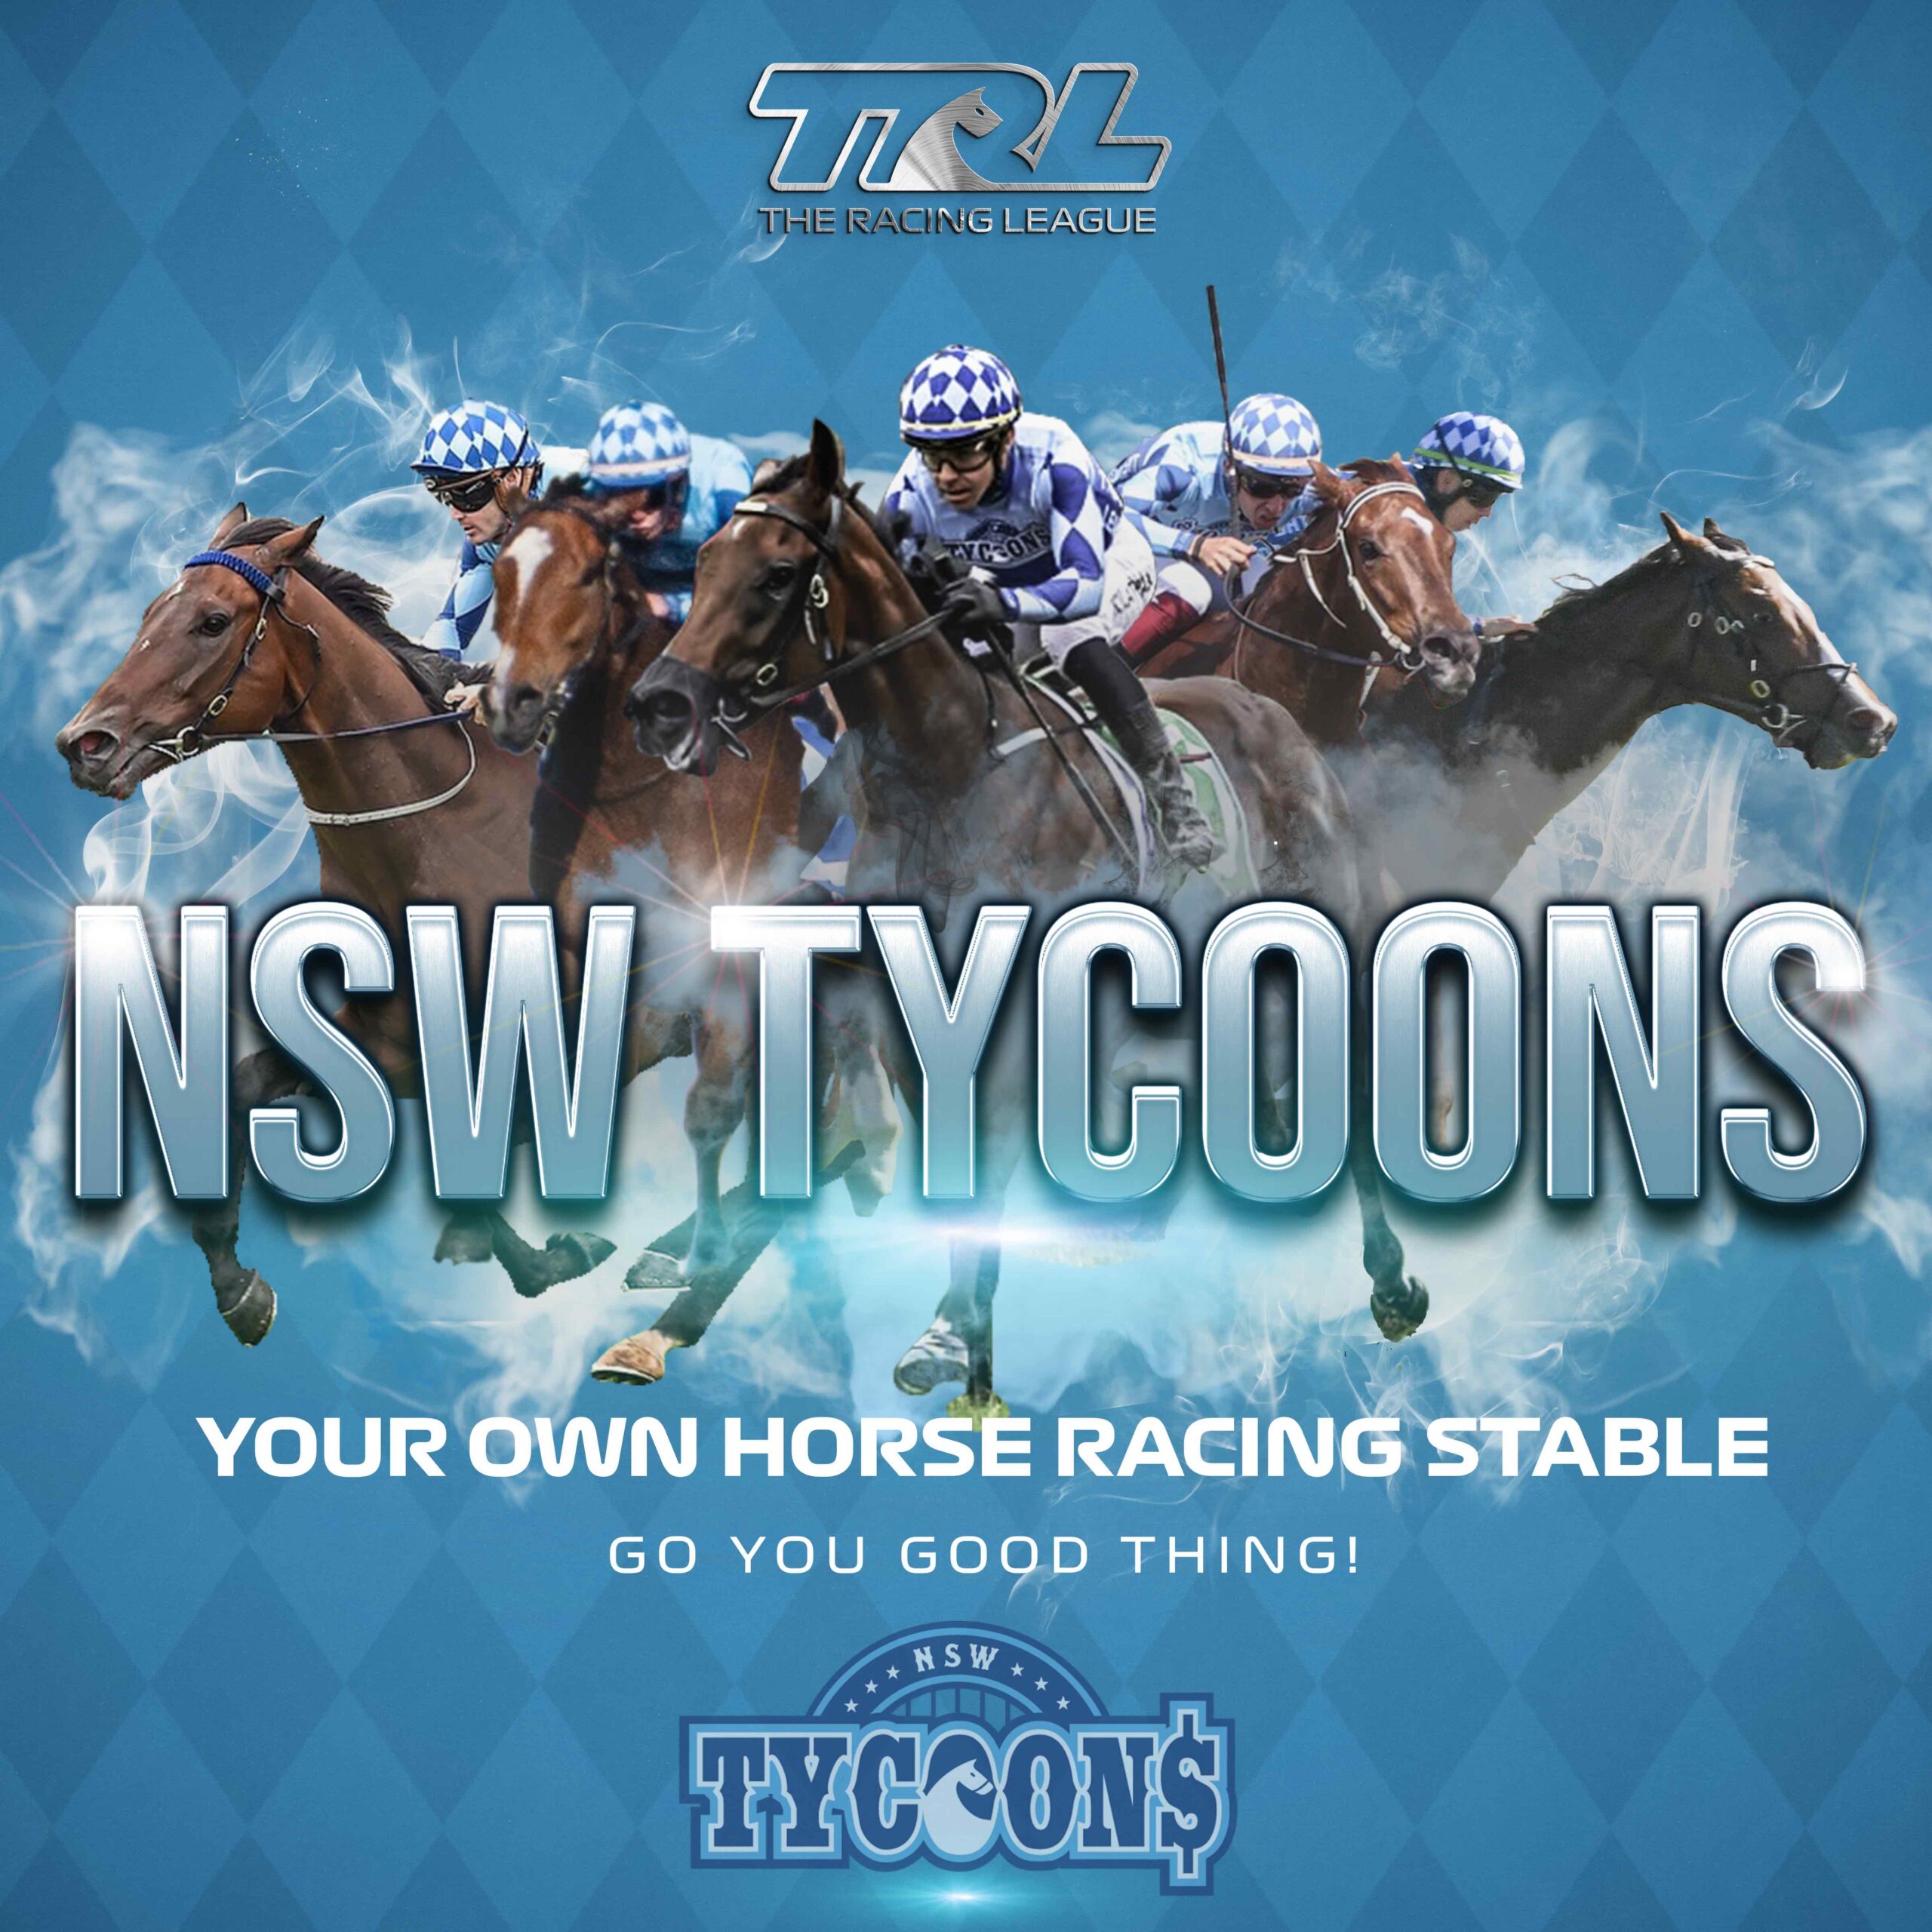 The NSW Tycoons racing team competing in The Racing League